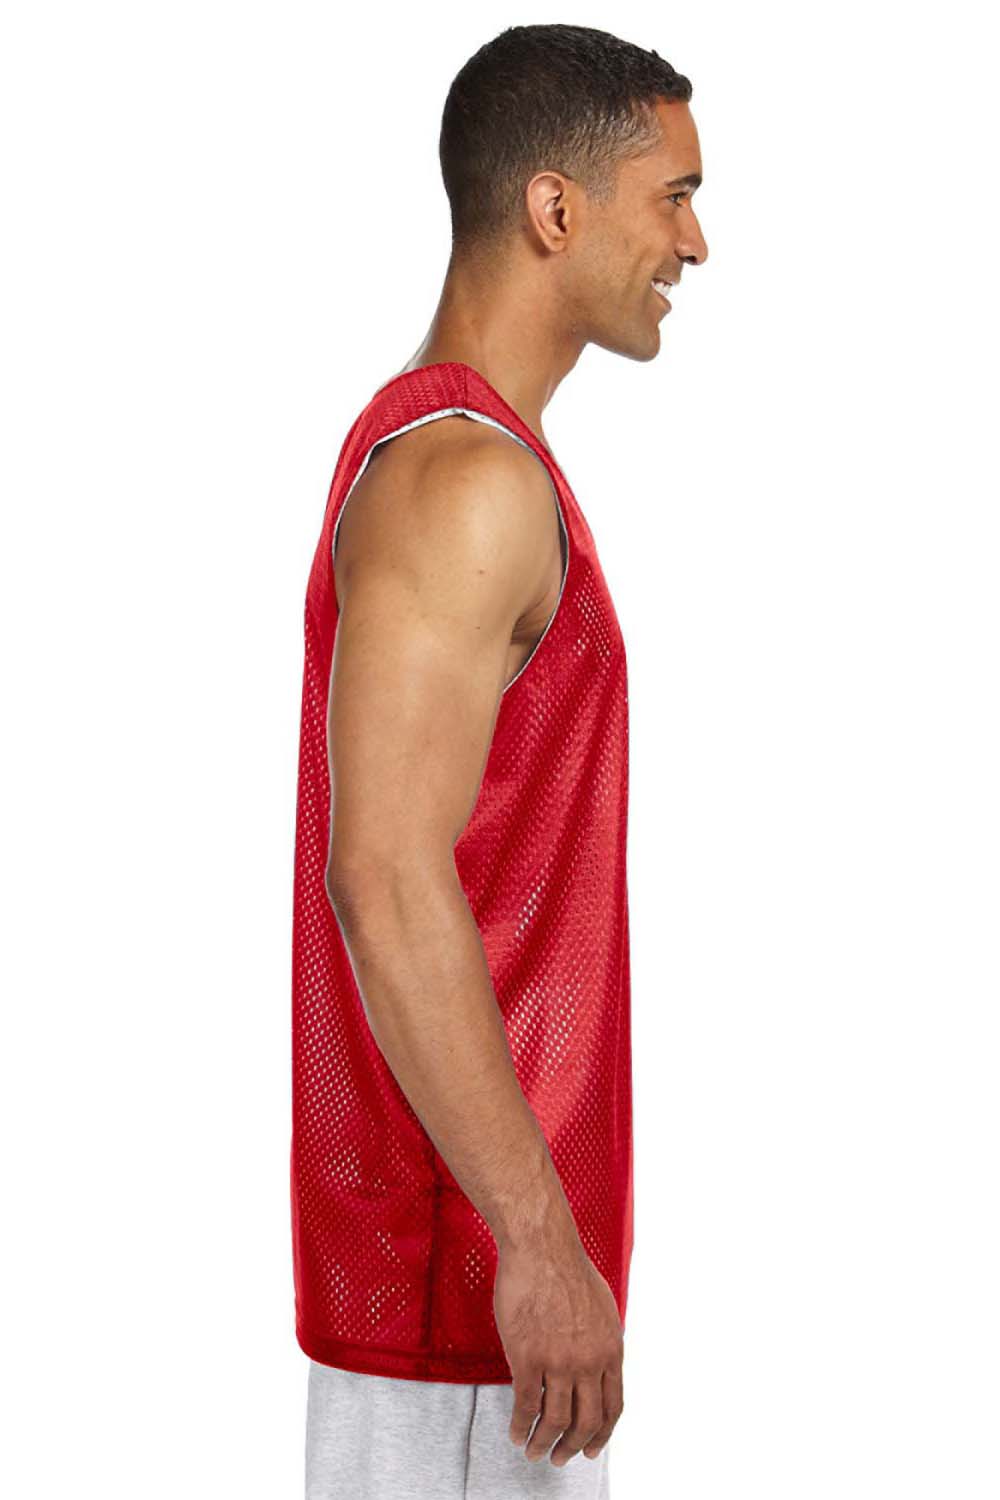 A4 NF1270 Mens Reversible Mesh Moisture Wicking Tank Top Scarlet Red Model Side